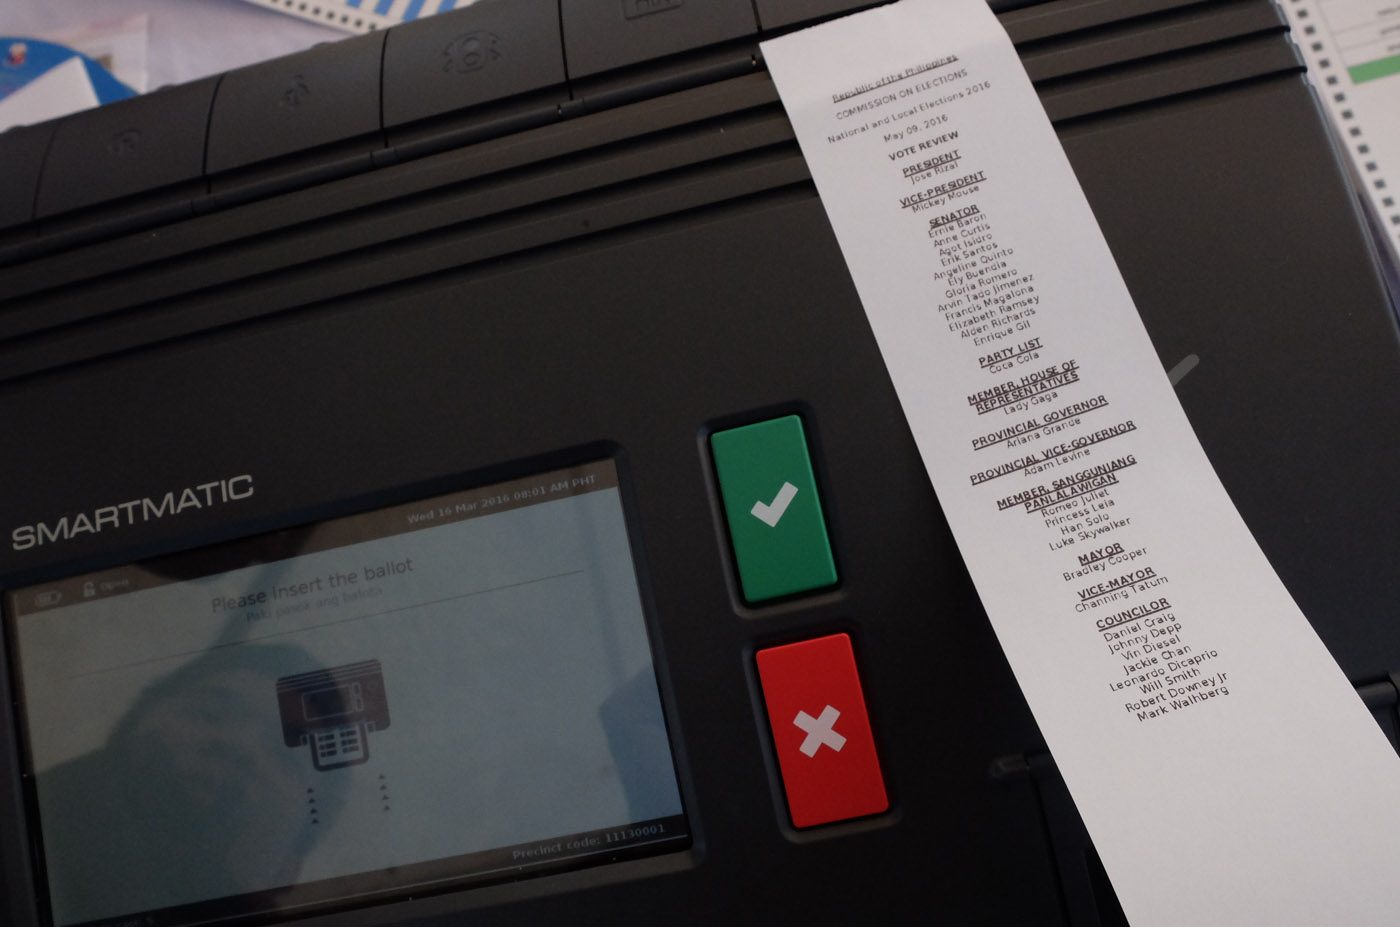 Smartmatic donates paper for voting receipts